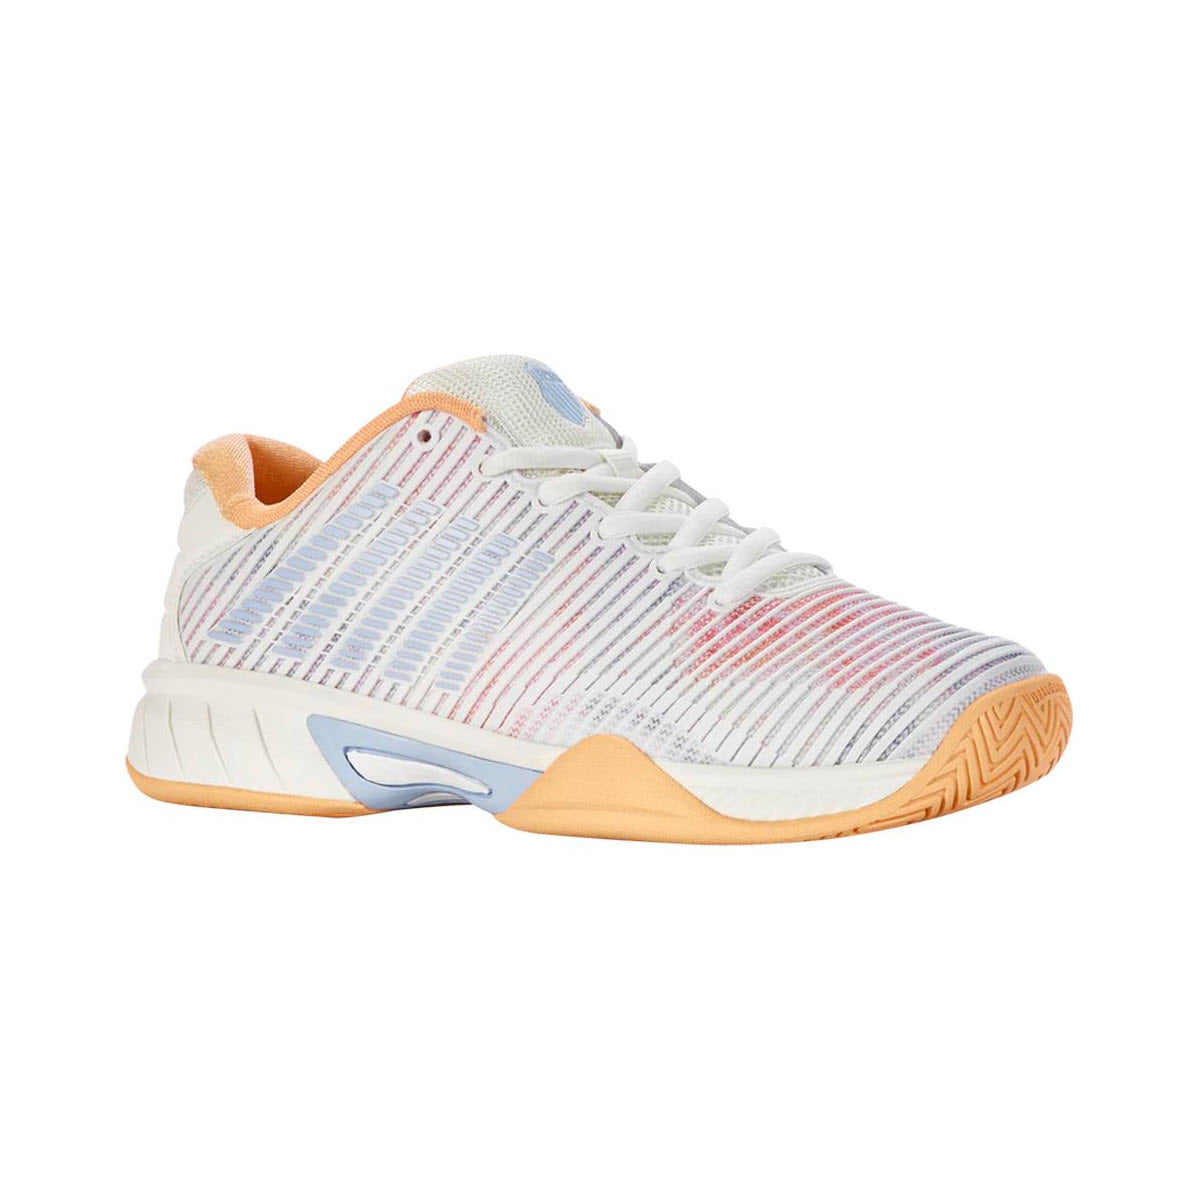 White and orange K-Swiss Hypercourt Express 2 court shoe with striped pattern on a white background.